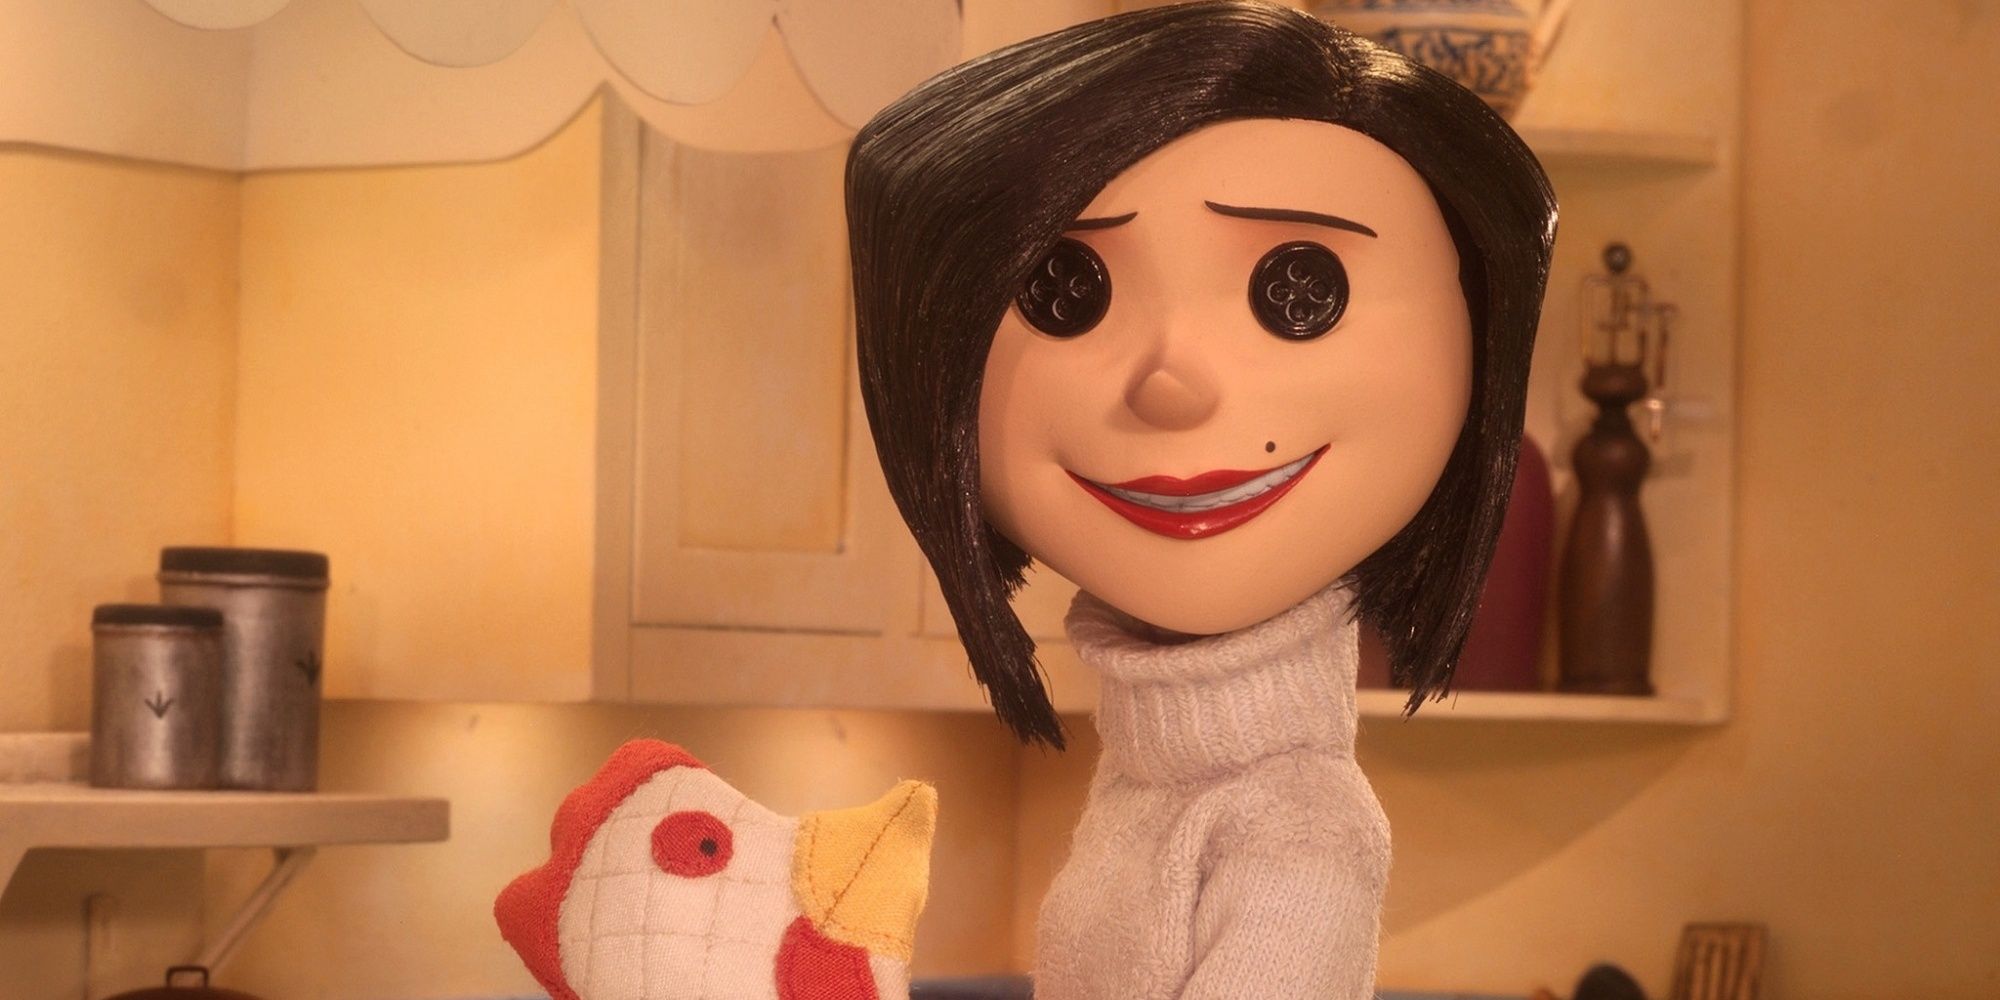 Other Mother in the kitchen in Coraline.